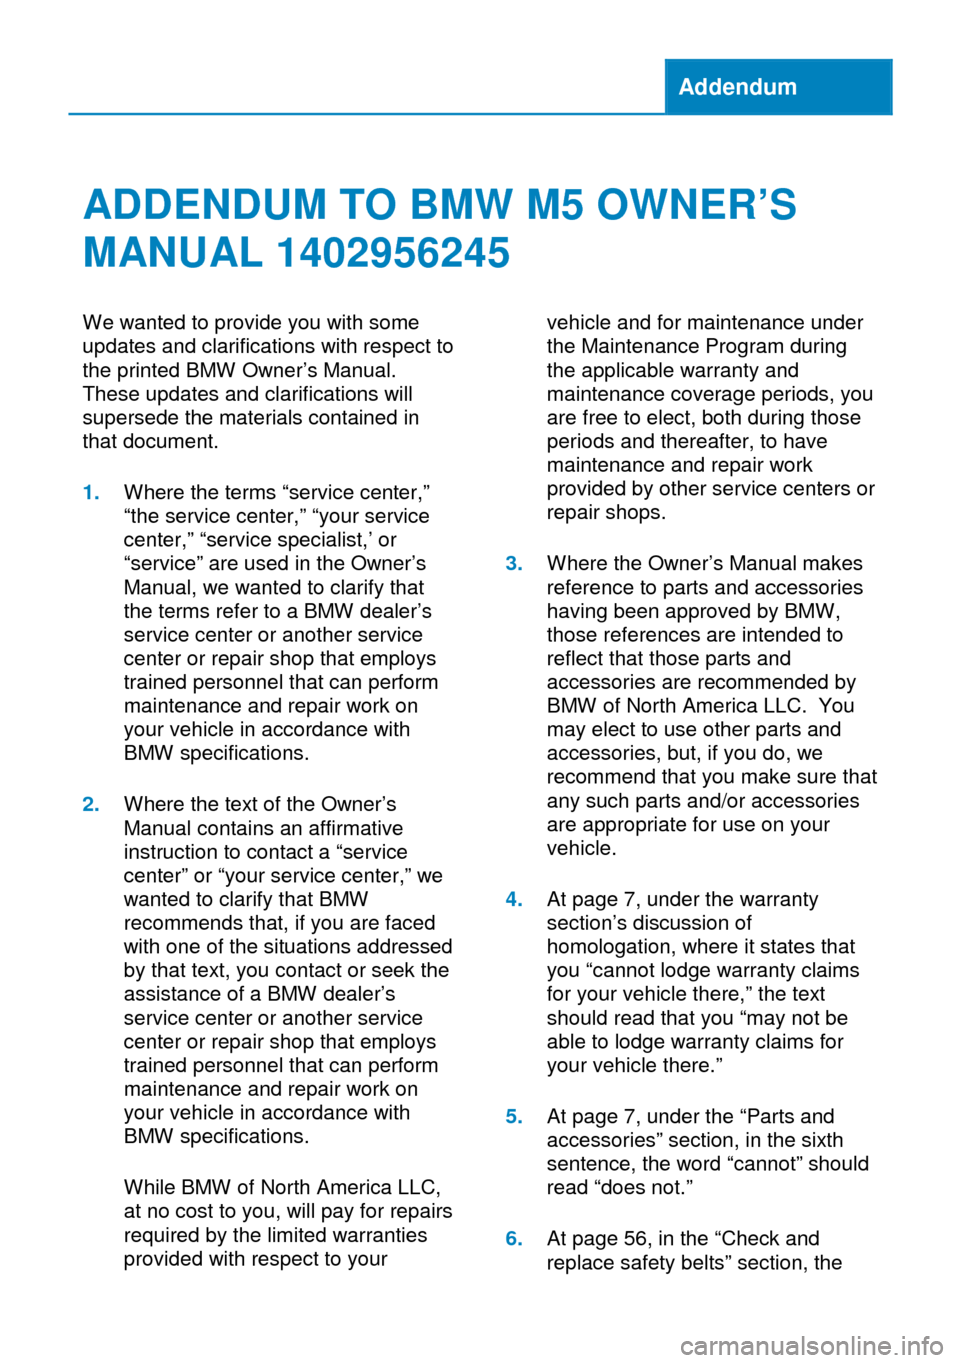 BMW M5 2014 F10M Owners Manual Addendum
ADDENDUM TO BMW M5 OWNER’S
MANUAL 1402956245
We wanted to provide you with some
updates and clarifications with respect to
the printed BMW Owner’s Manual.
These updates and clarifications